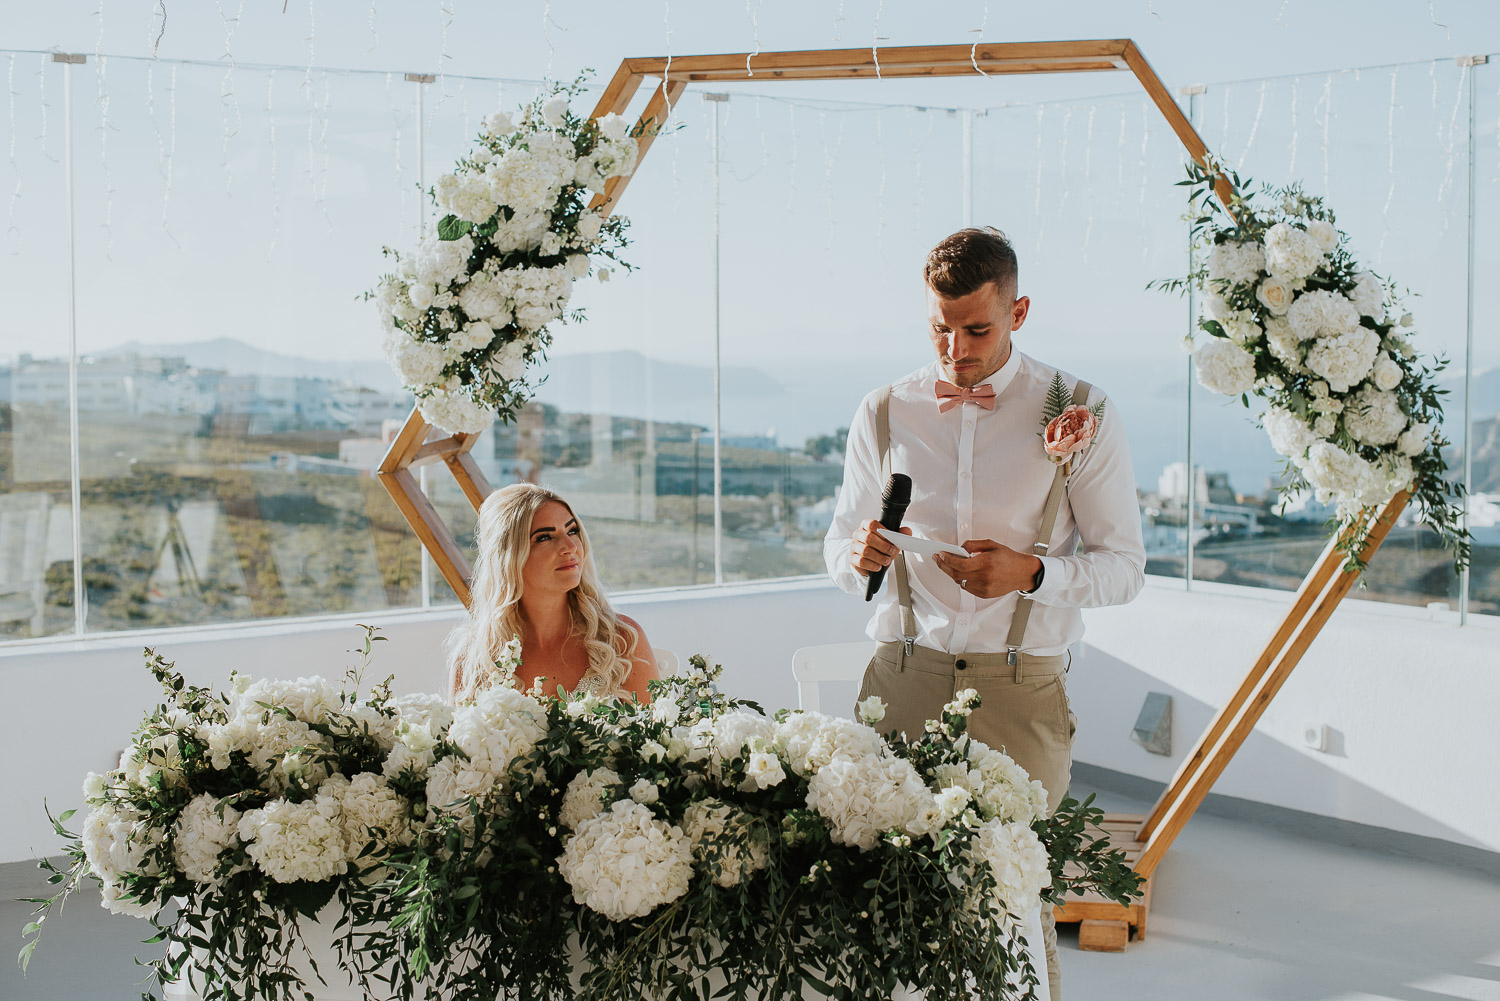 Wedding photographer Santorini: bride looks at her groom as he reads his speech basked in the sun by Ben and Vesna.